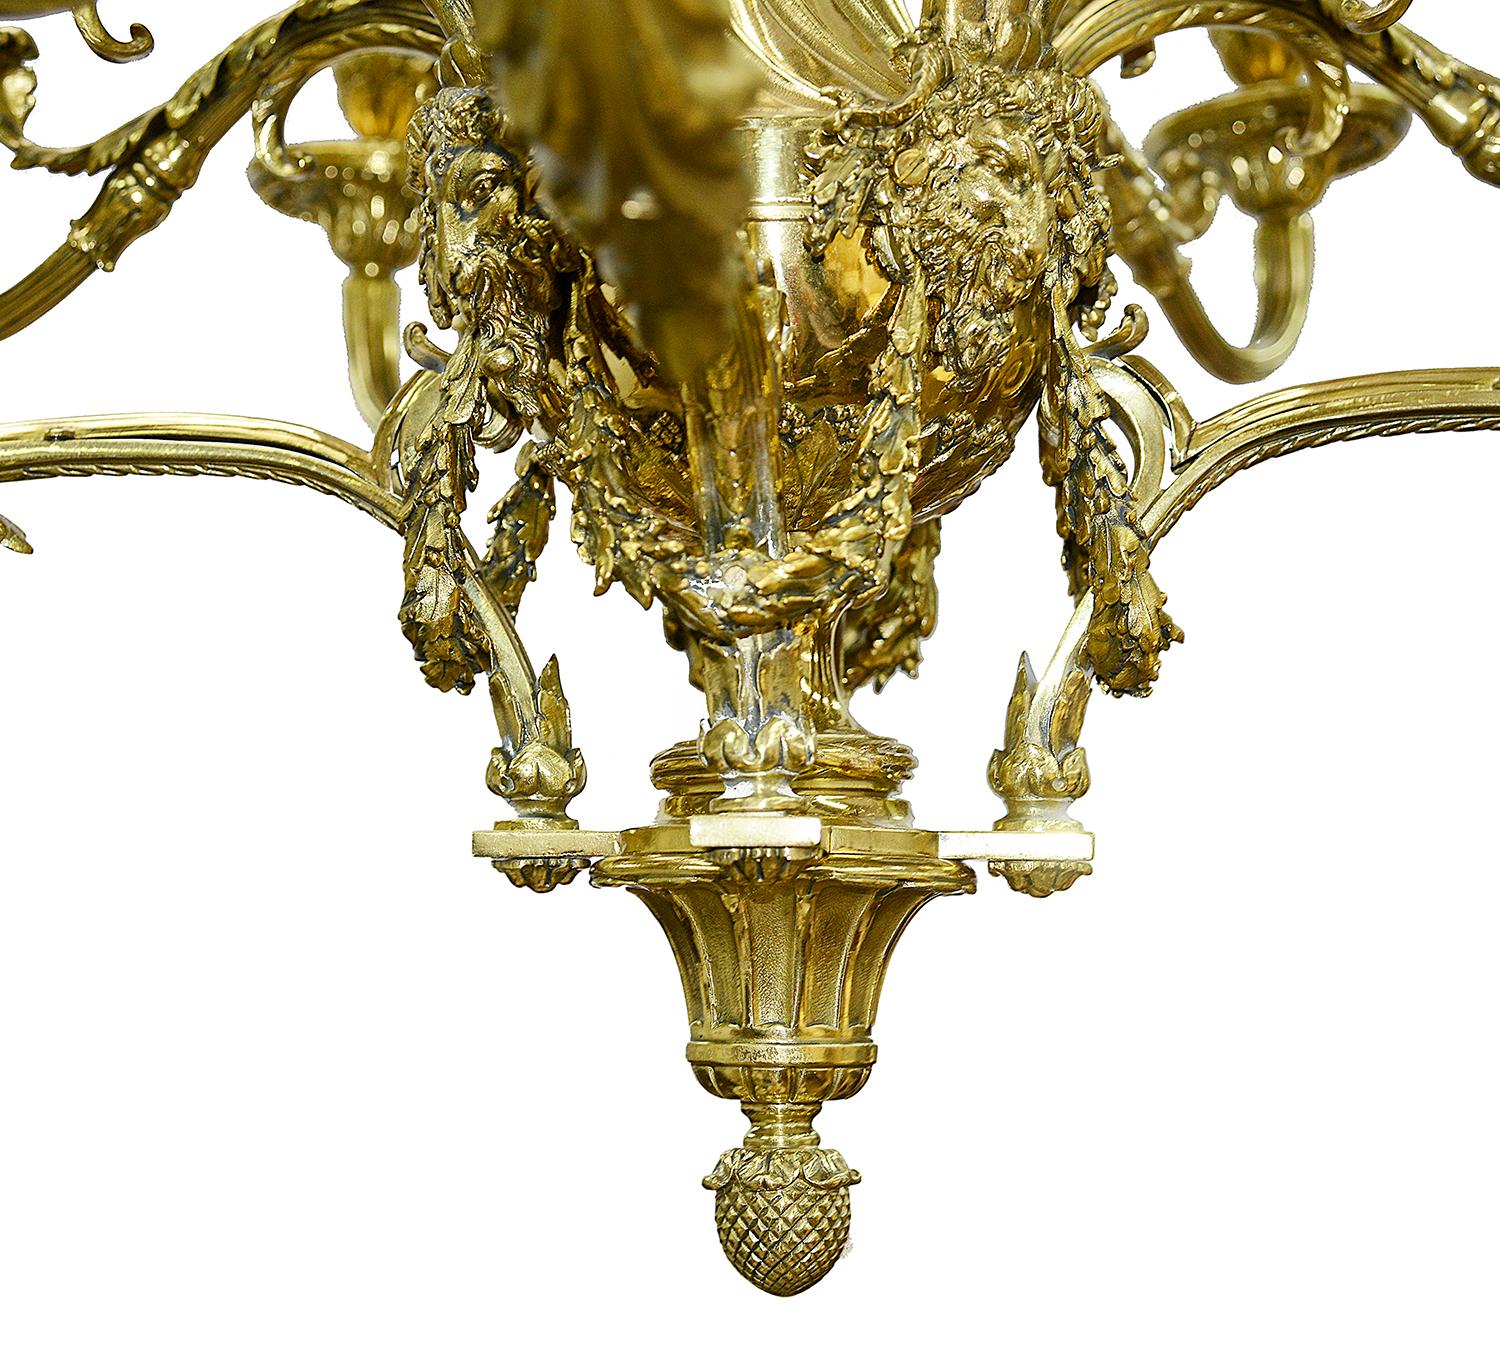 A very impressive large pair of 19th century classical ormolu 20 branch chandeliers, each having swag, foliate and scrolling decoration. Scrolling out swept arms with sconces, Rams heads and acorn finals to the bases.